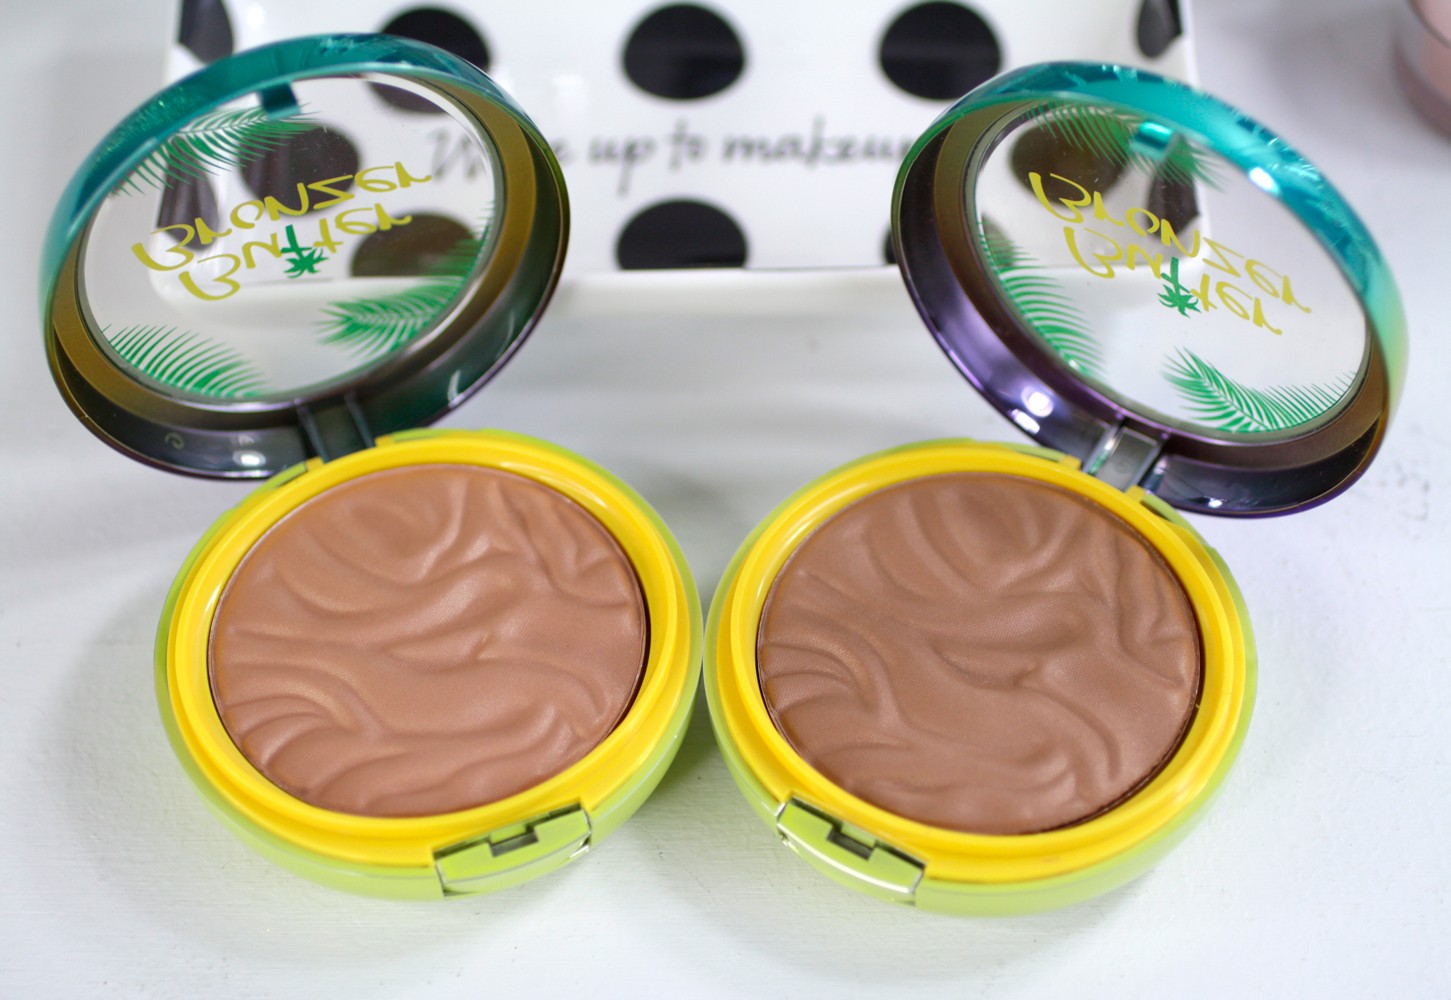 Physicians Formula Butter Bronzer Sunkissed and Deep shades